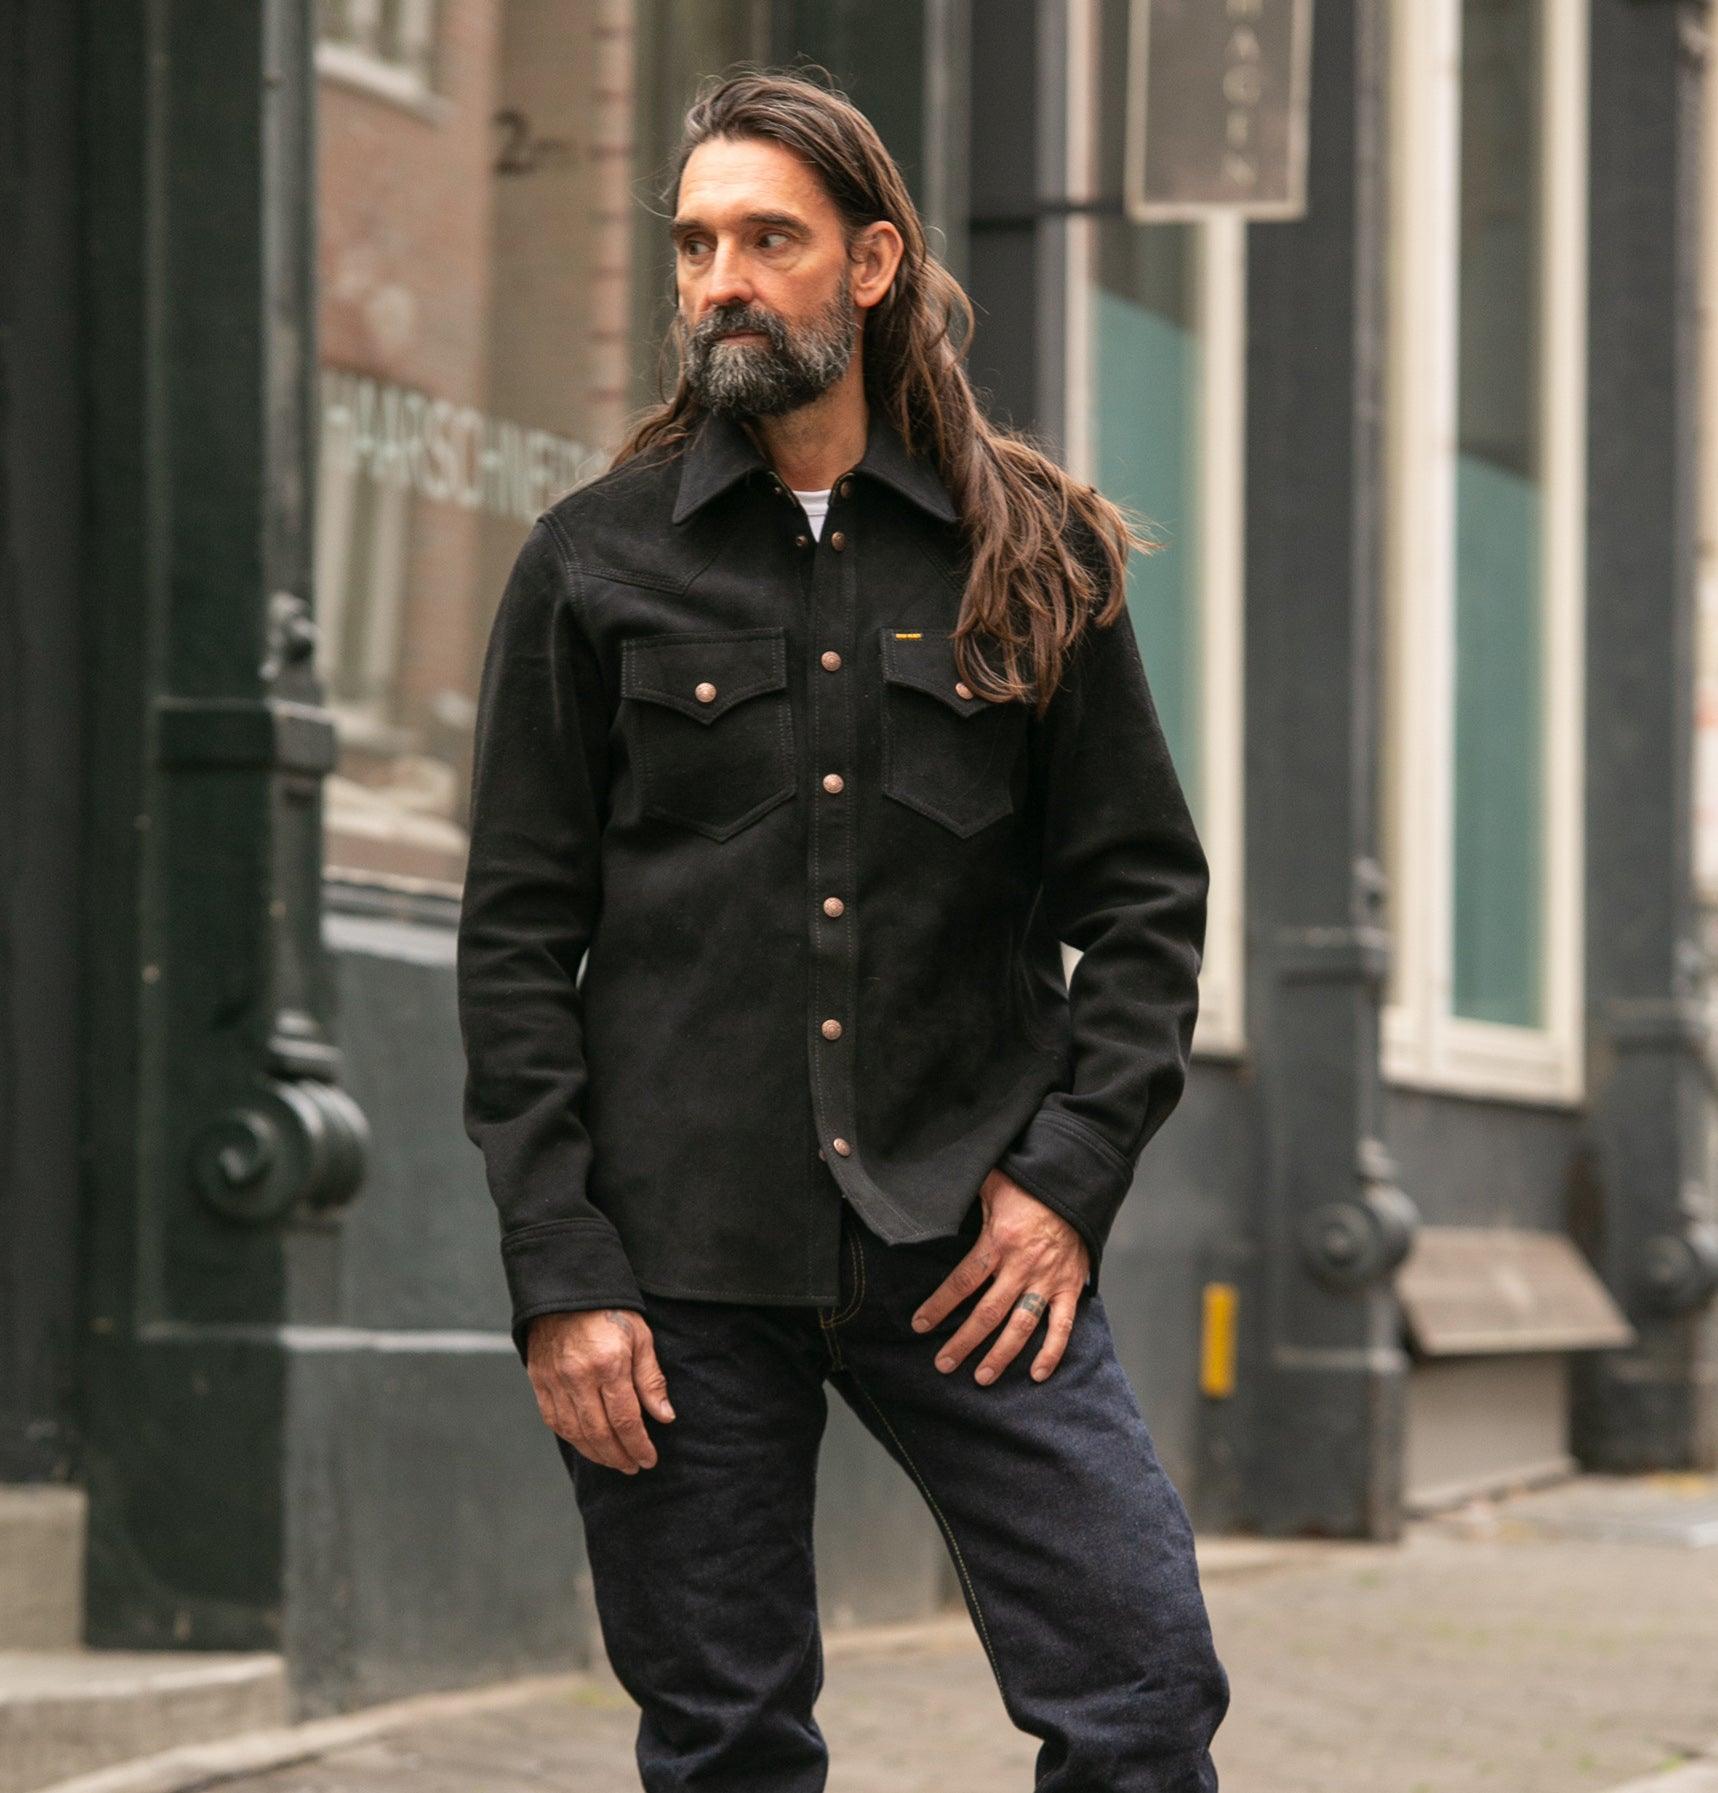 Image showing the IHSB-BIGBUCK-BLK - Deerskin Western Shirt 'The Big Buck' Black which is a Shirts described by the following info Back In, Iron Heart, Released, Shirts, Tops and sold on the IRON HEART GERMANY online store